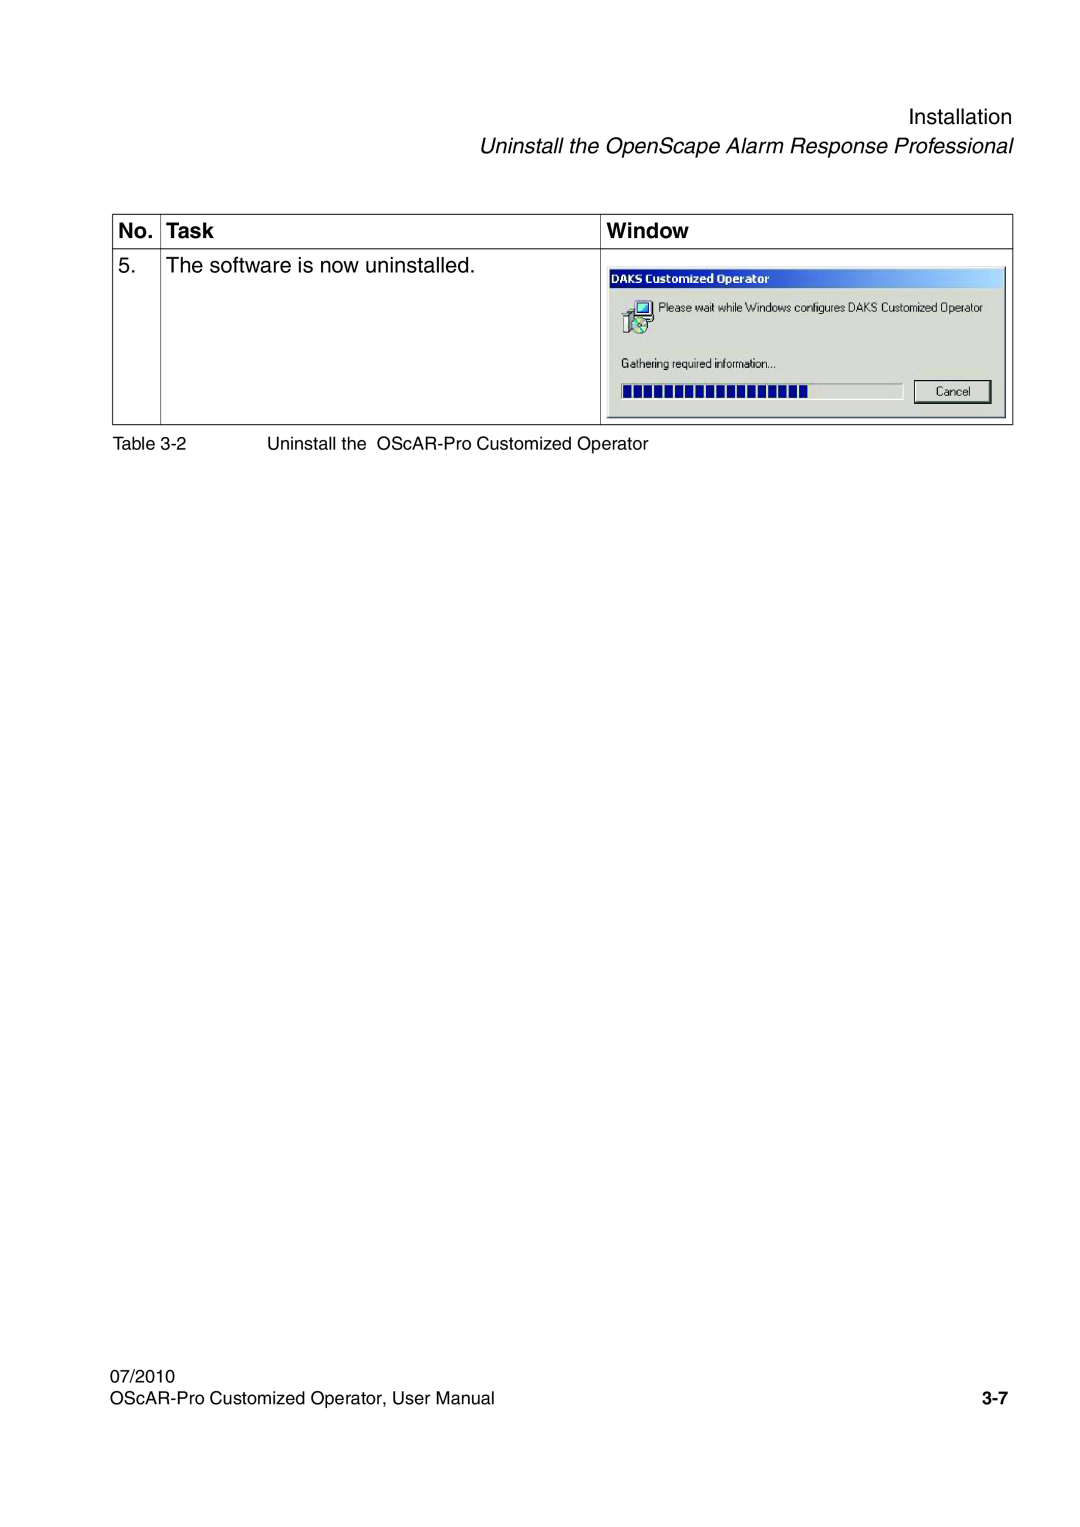 Siemens A31003-51730-U103-7619 user manual Installation, No. Task, The software is now uninstalled, Window 